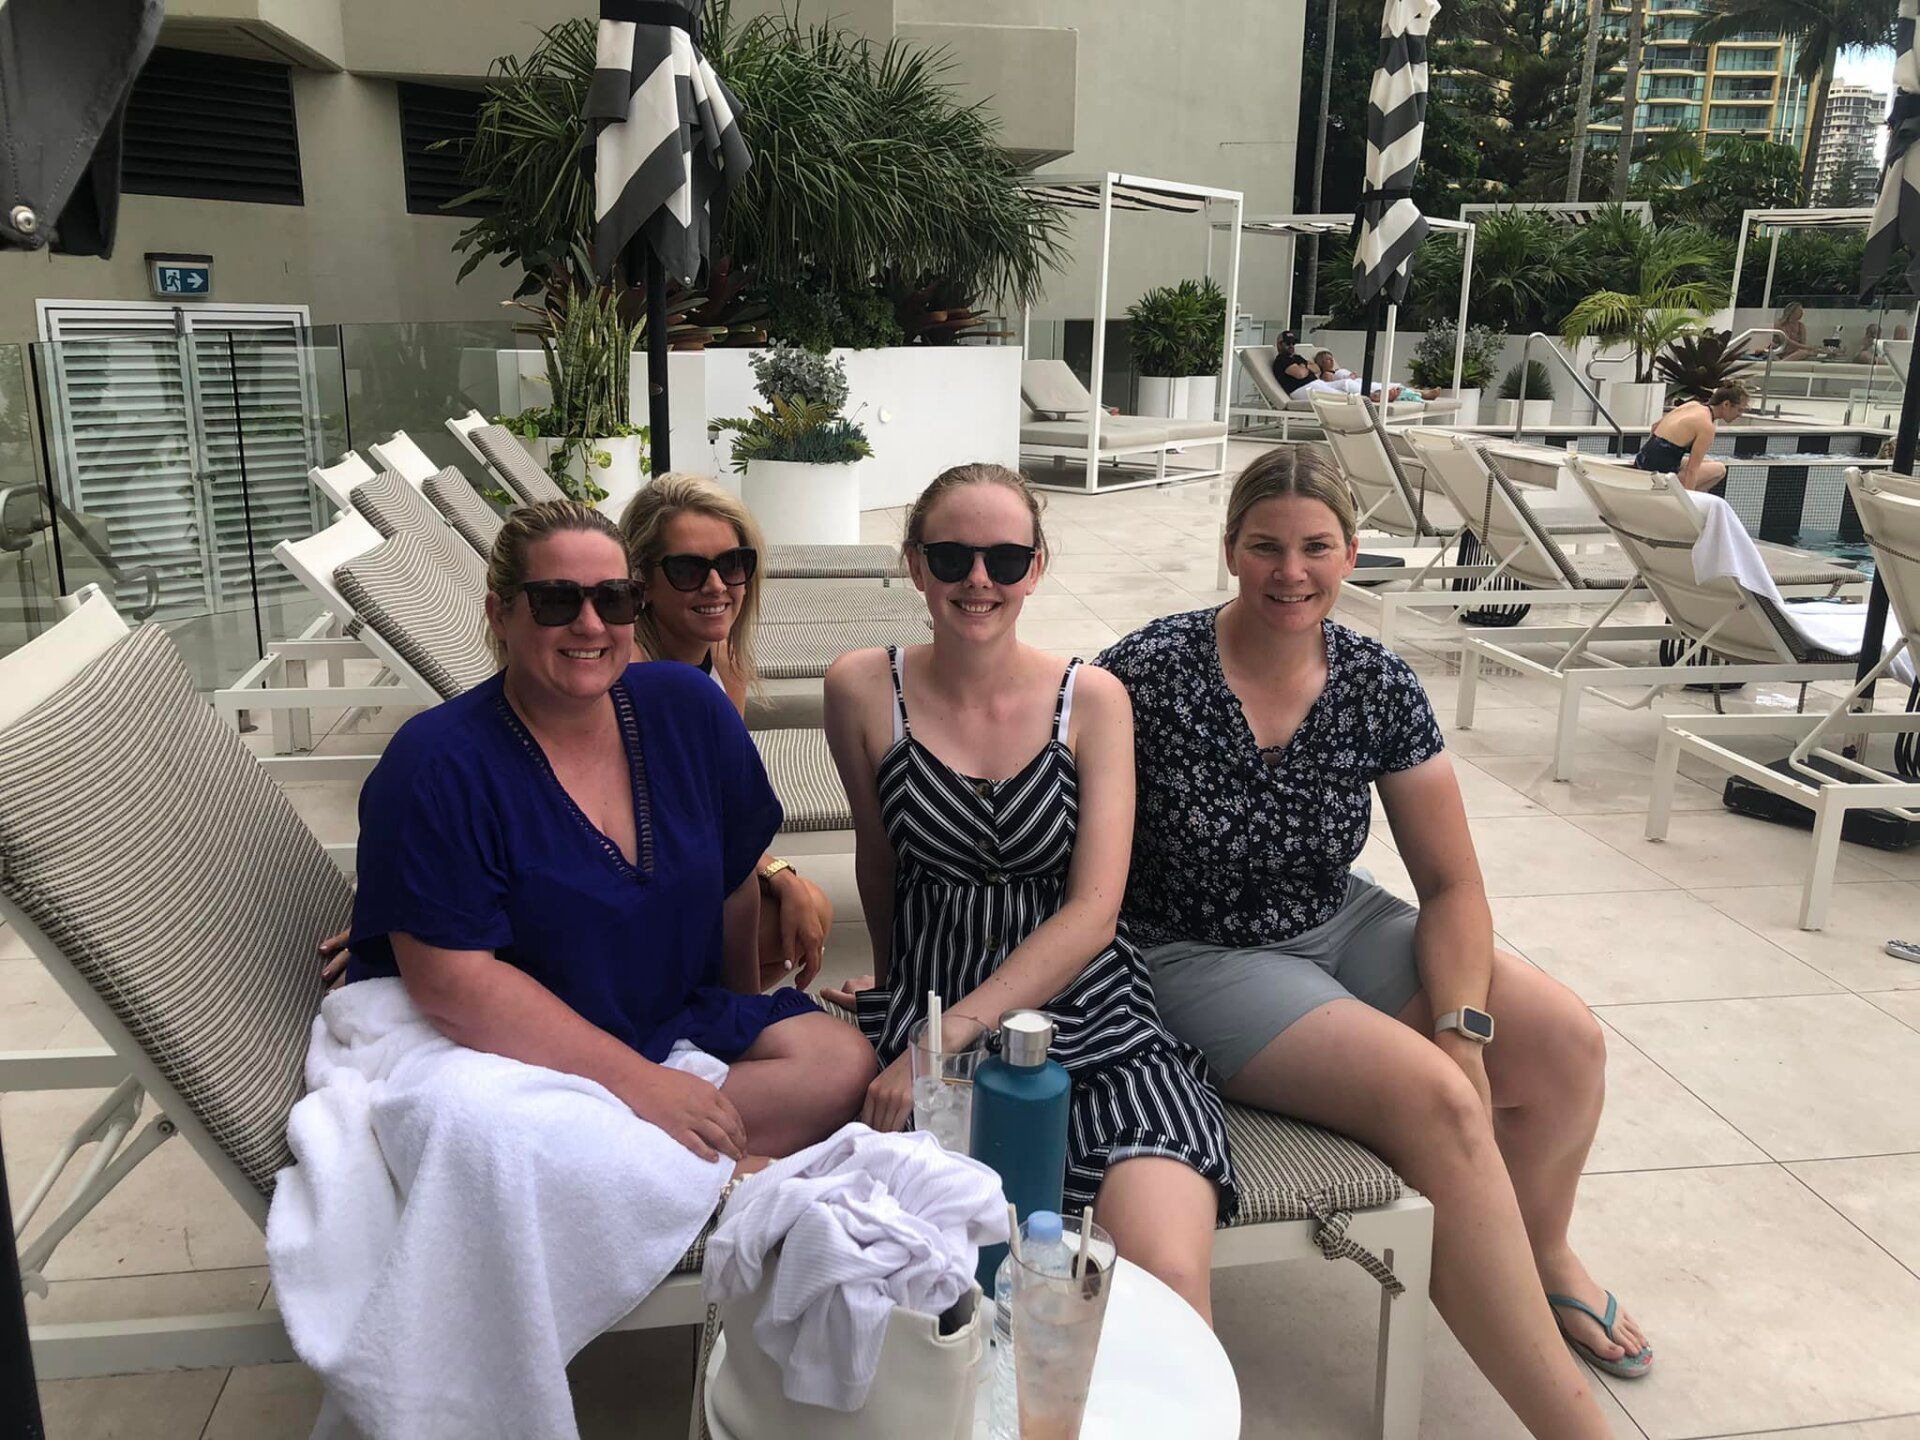 4 ladies sitting on sun lounges by the pool at the gold coast smiling.